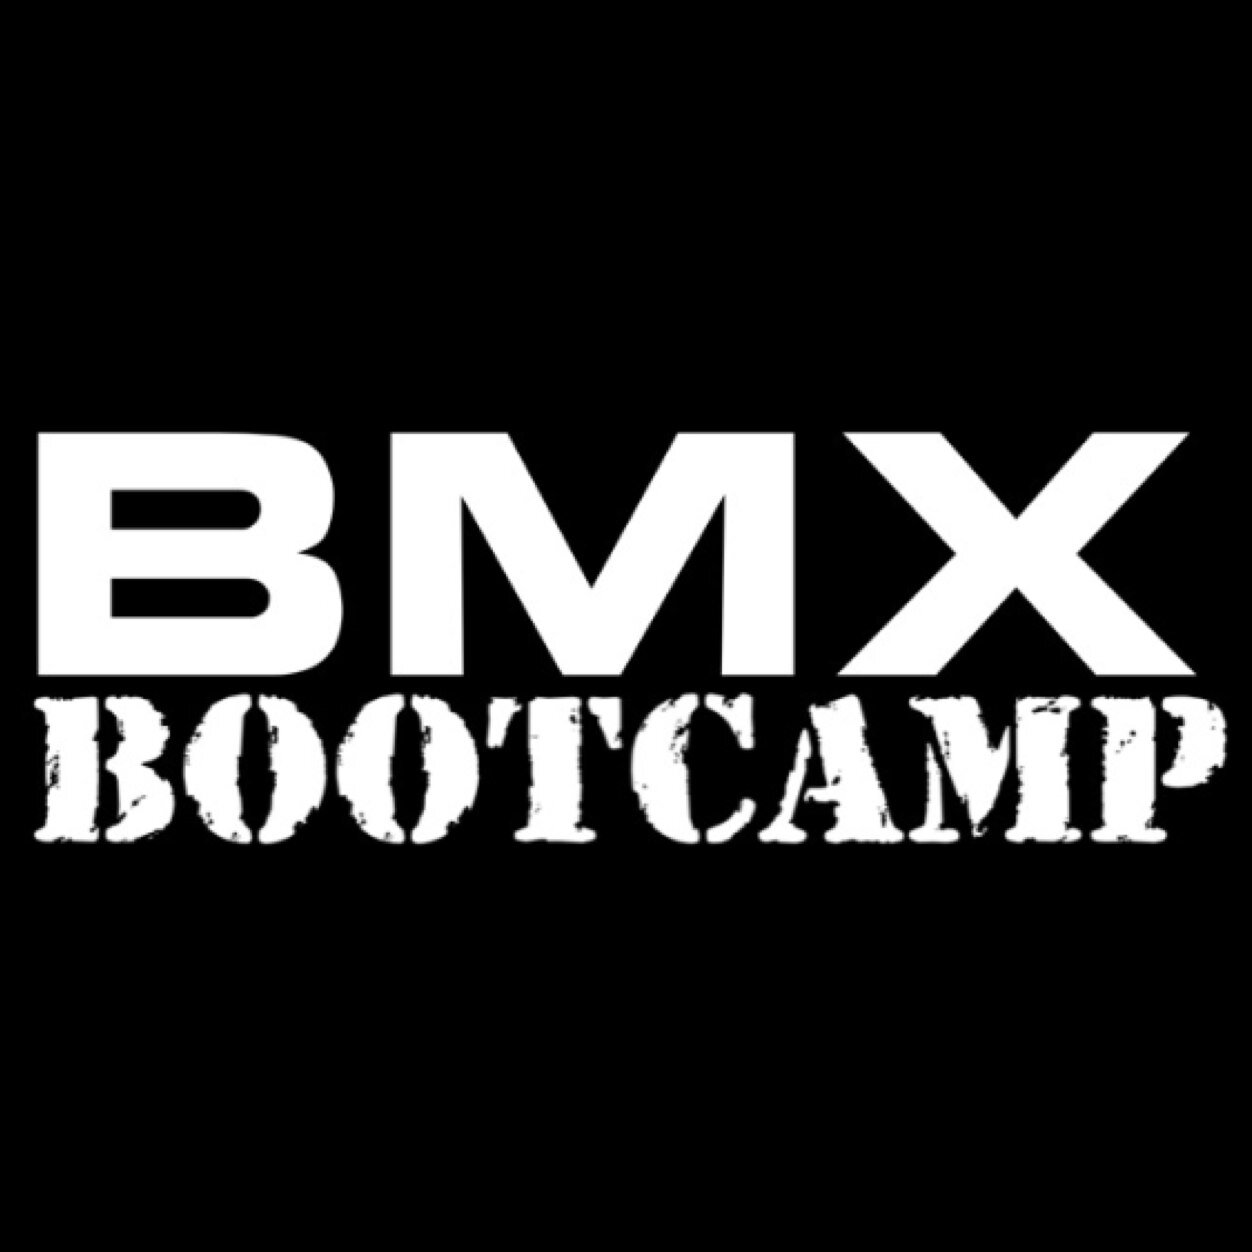 BMX BOOTCAMP is an elite traning company with coaches Bryan Bullivant, Dayton Peterson, and Louis Chartrain